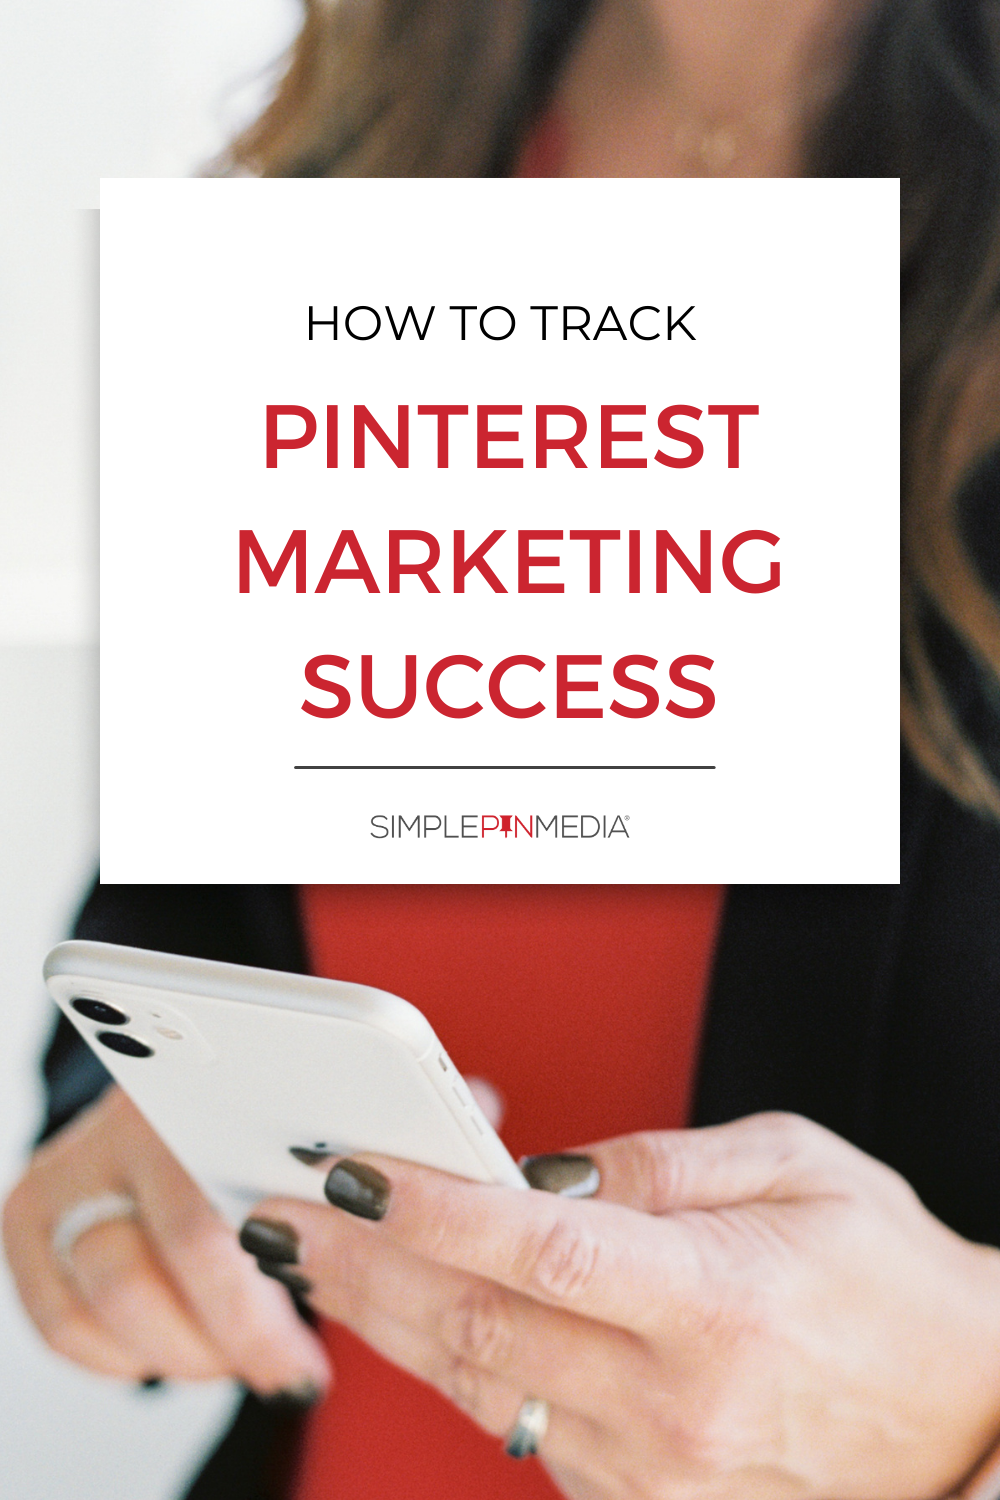 387 – Pinterest Growth Strategy: Tracking Success